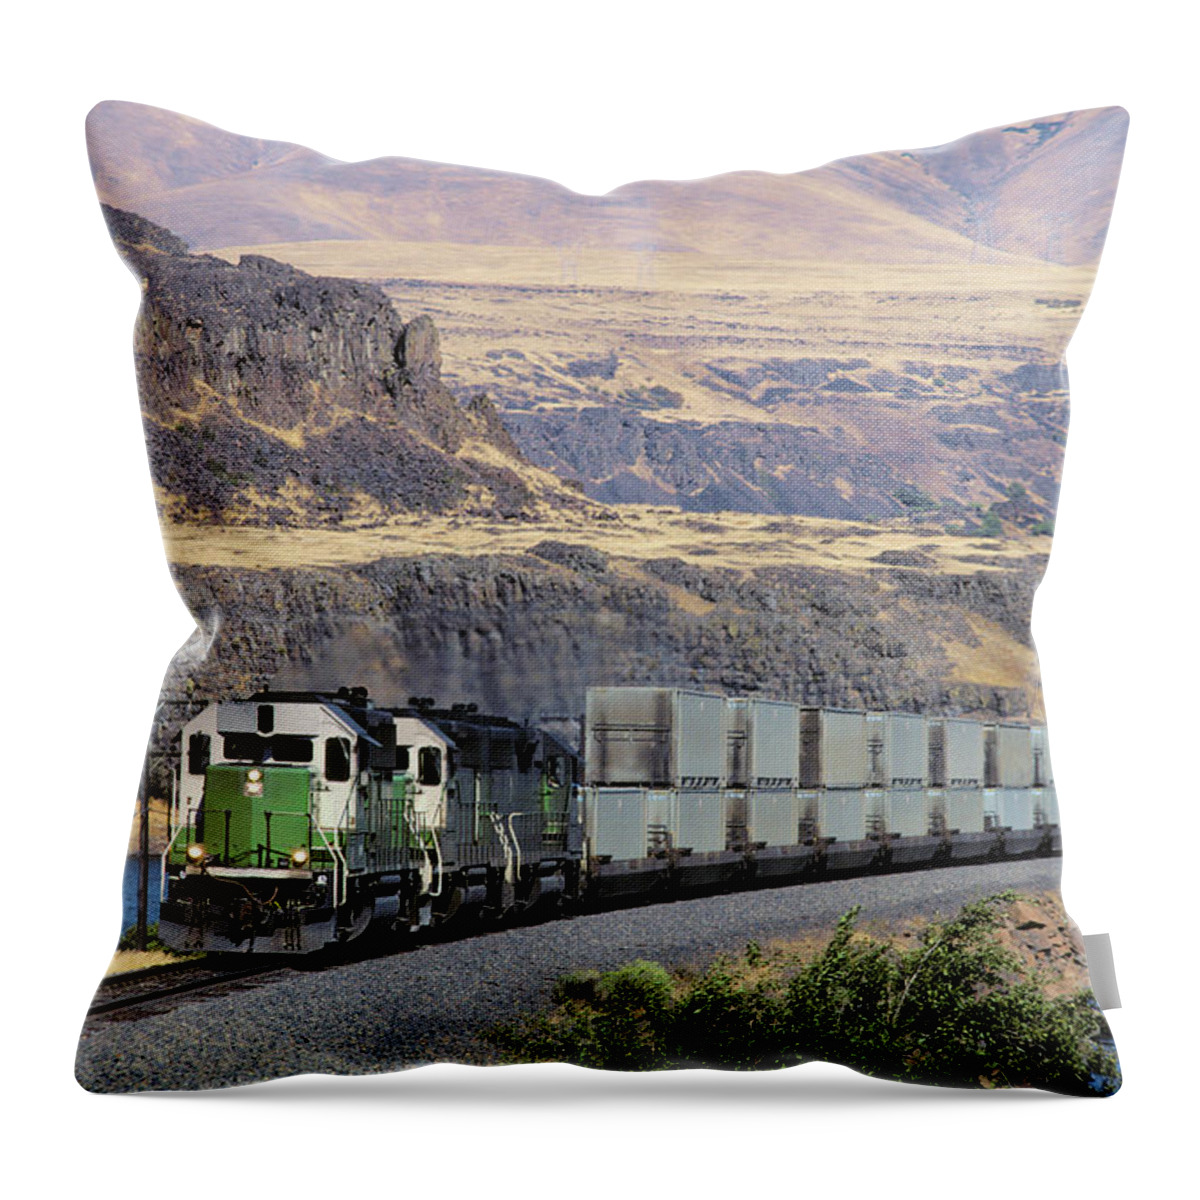 Scenics Throw Pillow featuring the photograph Container Trash Train In Columbia River by Beyondimages